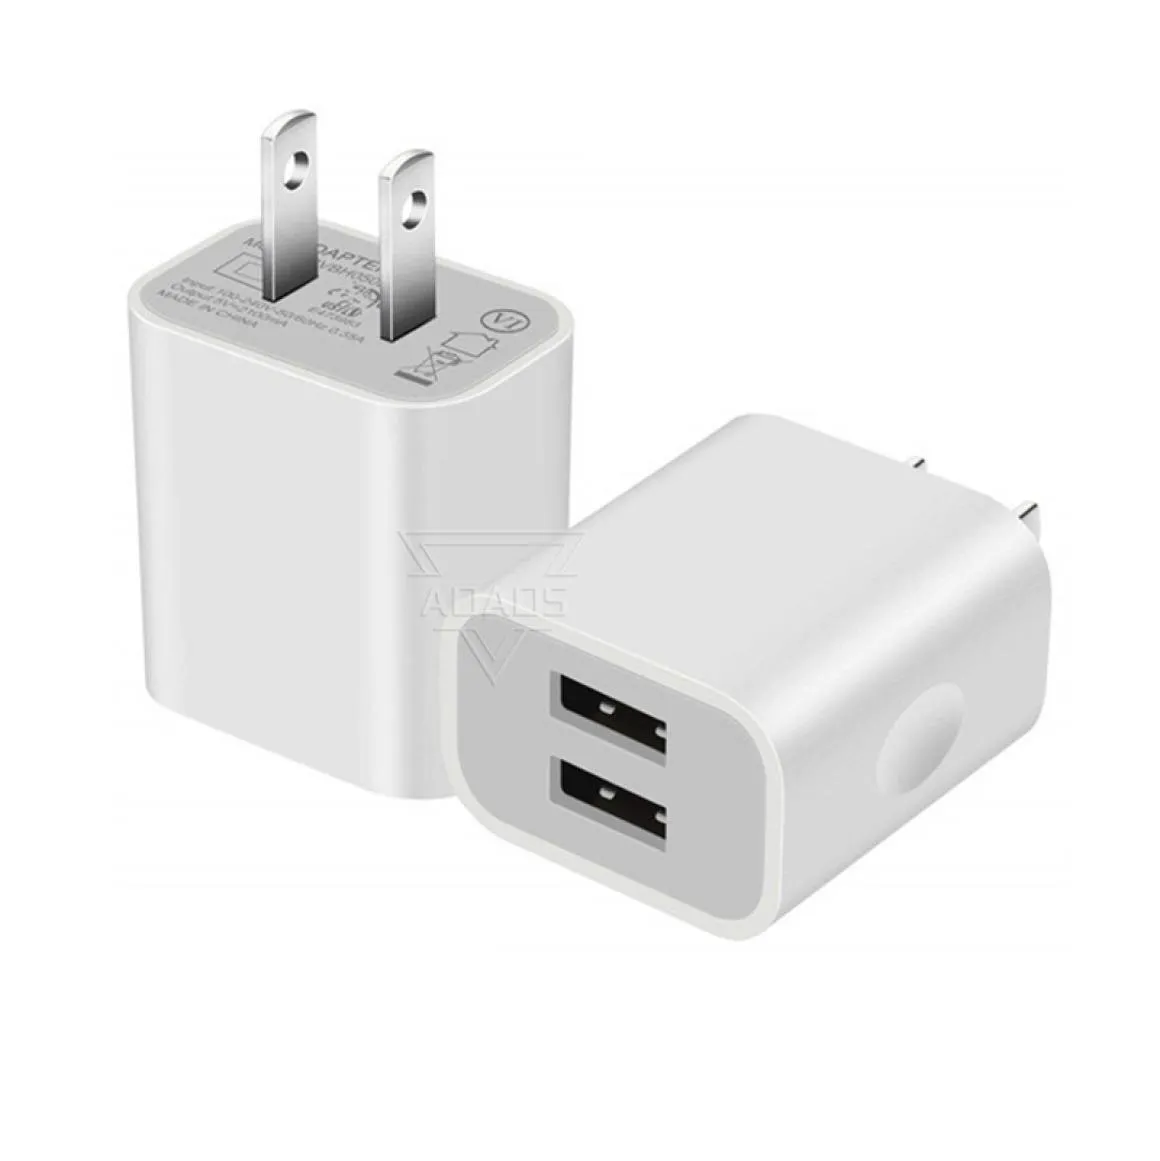 Dual USB Charging Block 2 Ports Fast wall charger EU US Phone Travel Power Charger Adapter For iphone Samsung Smartphones6543214